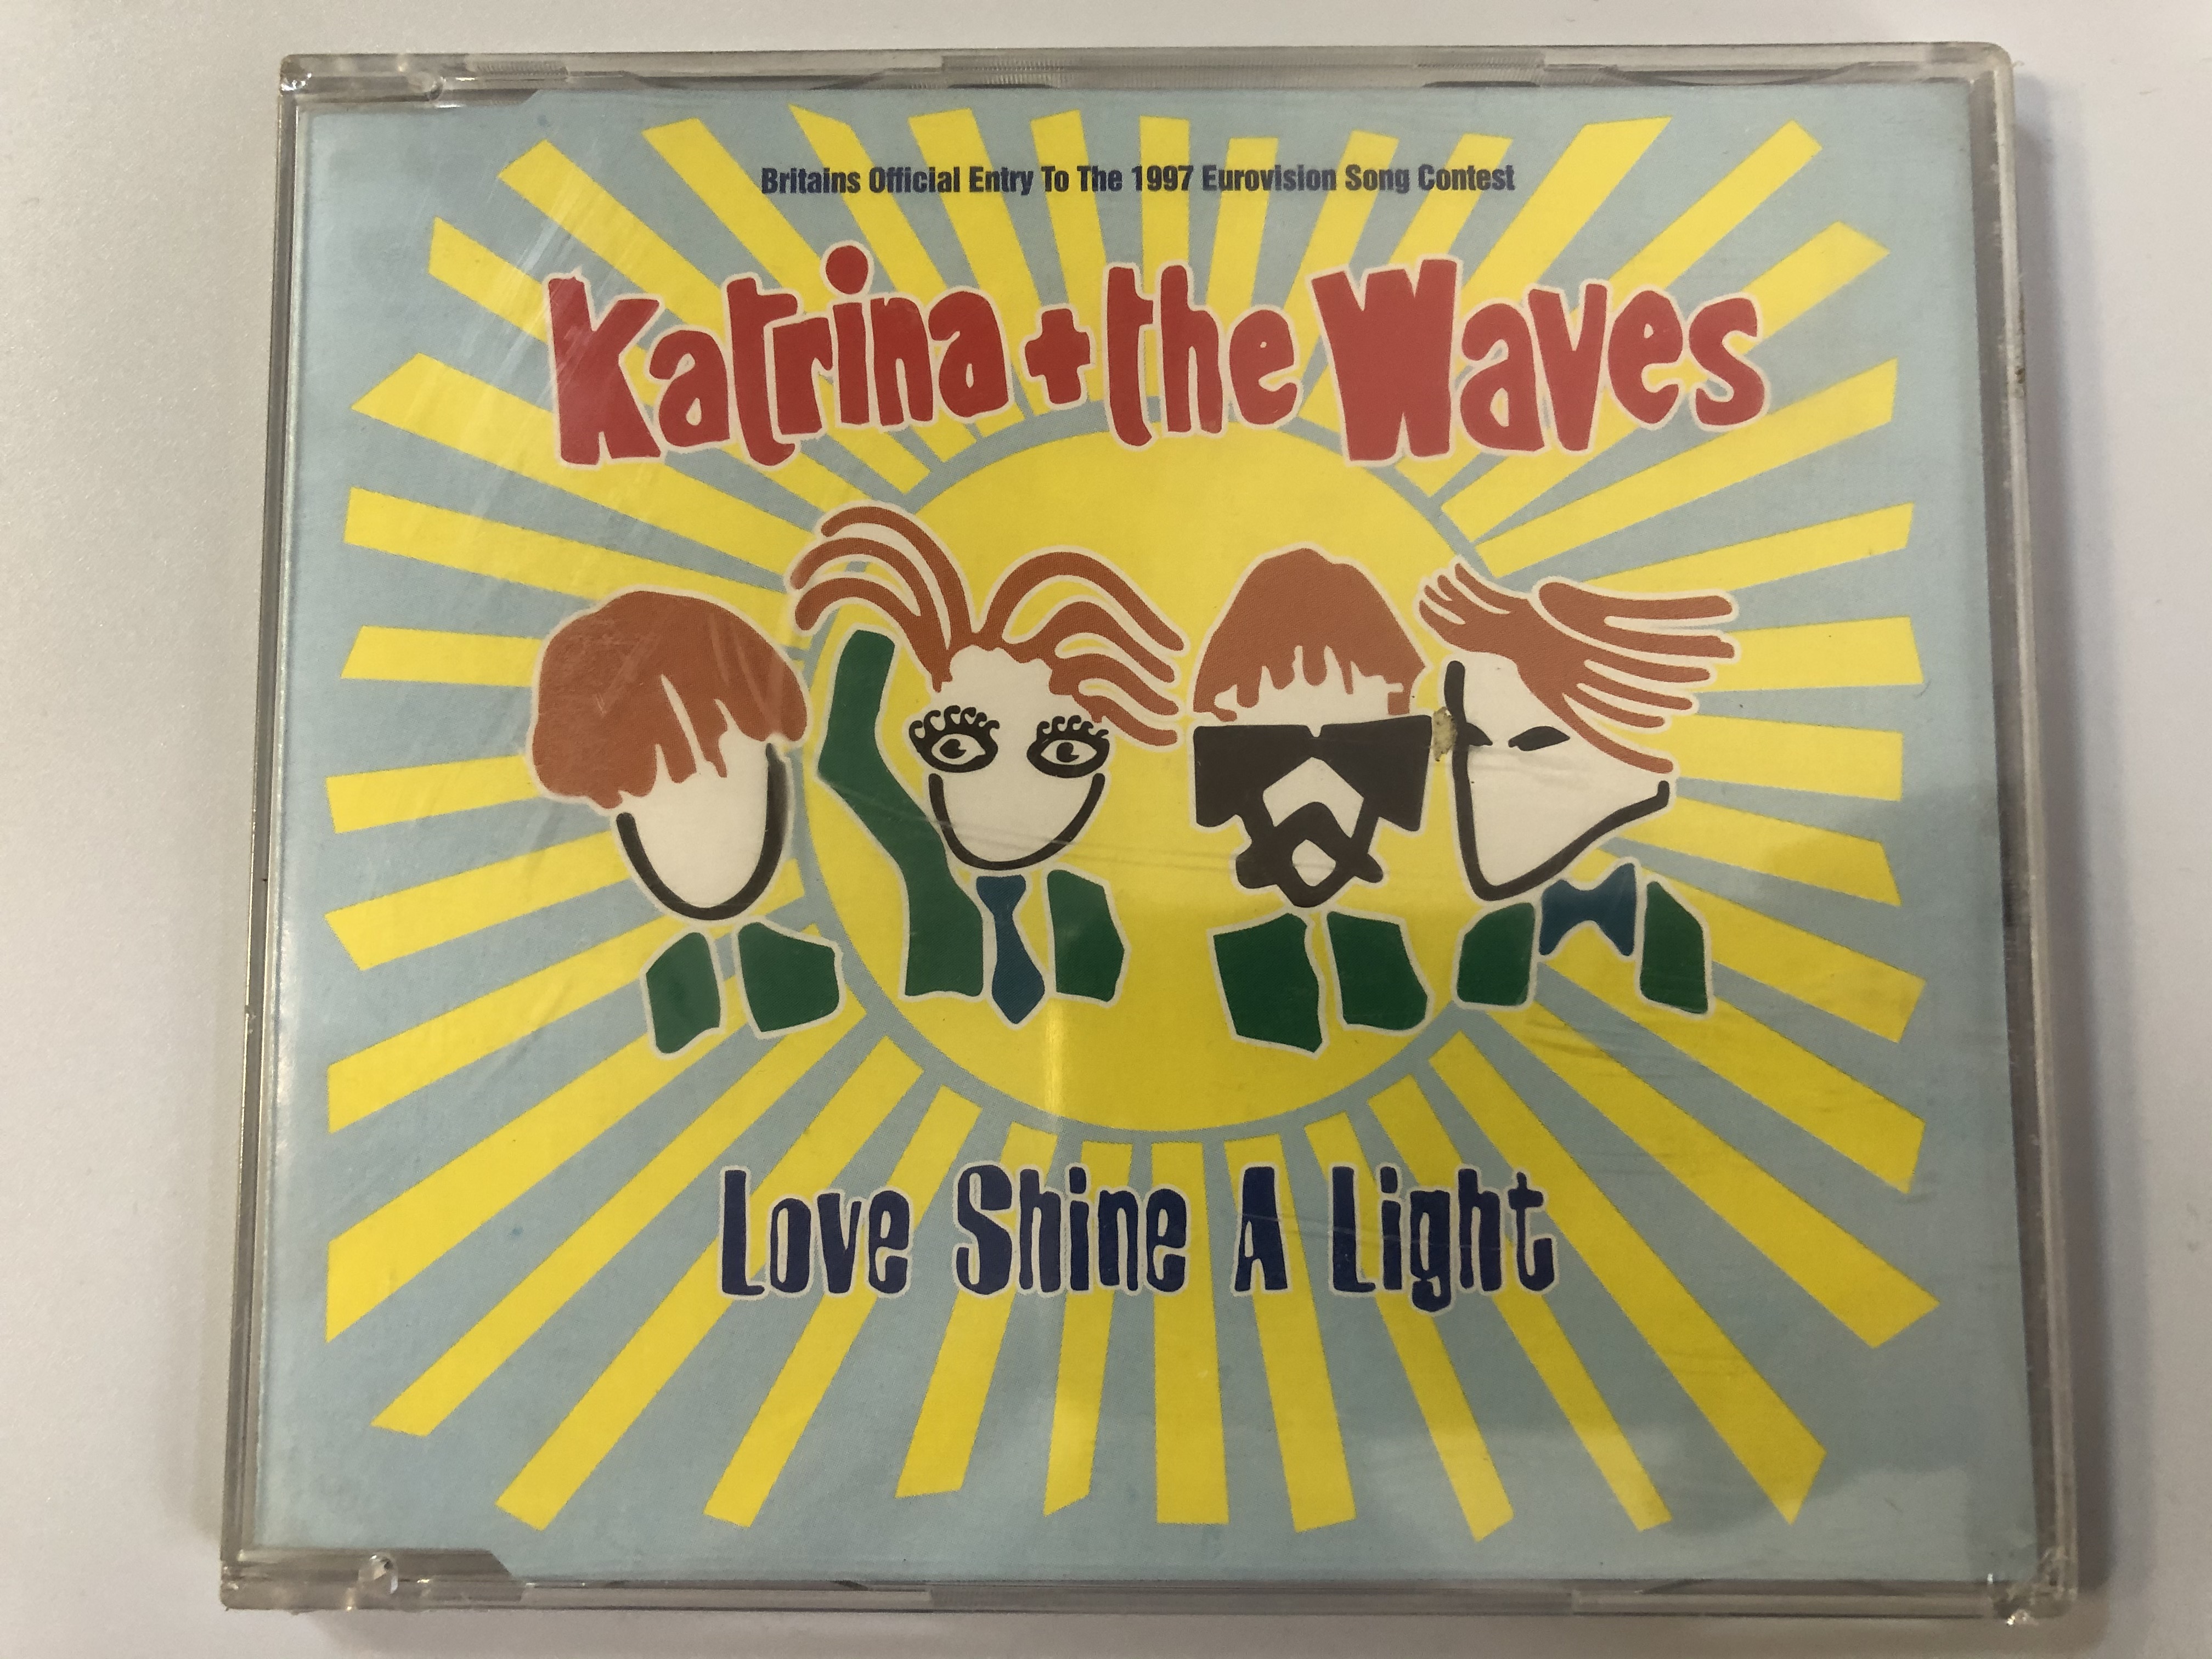 katrina-the-waves-love-shine-a-light-britains-official-entry-to-the-1997-eurovision-song-contest-eternal-audio-cd-0630-18816-2-1-.jpg